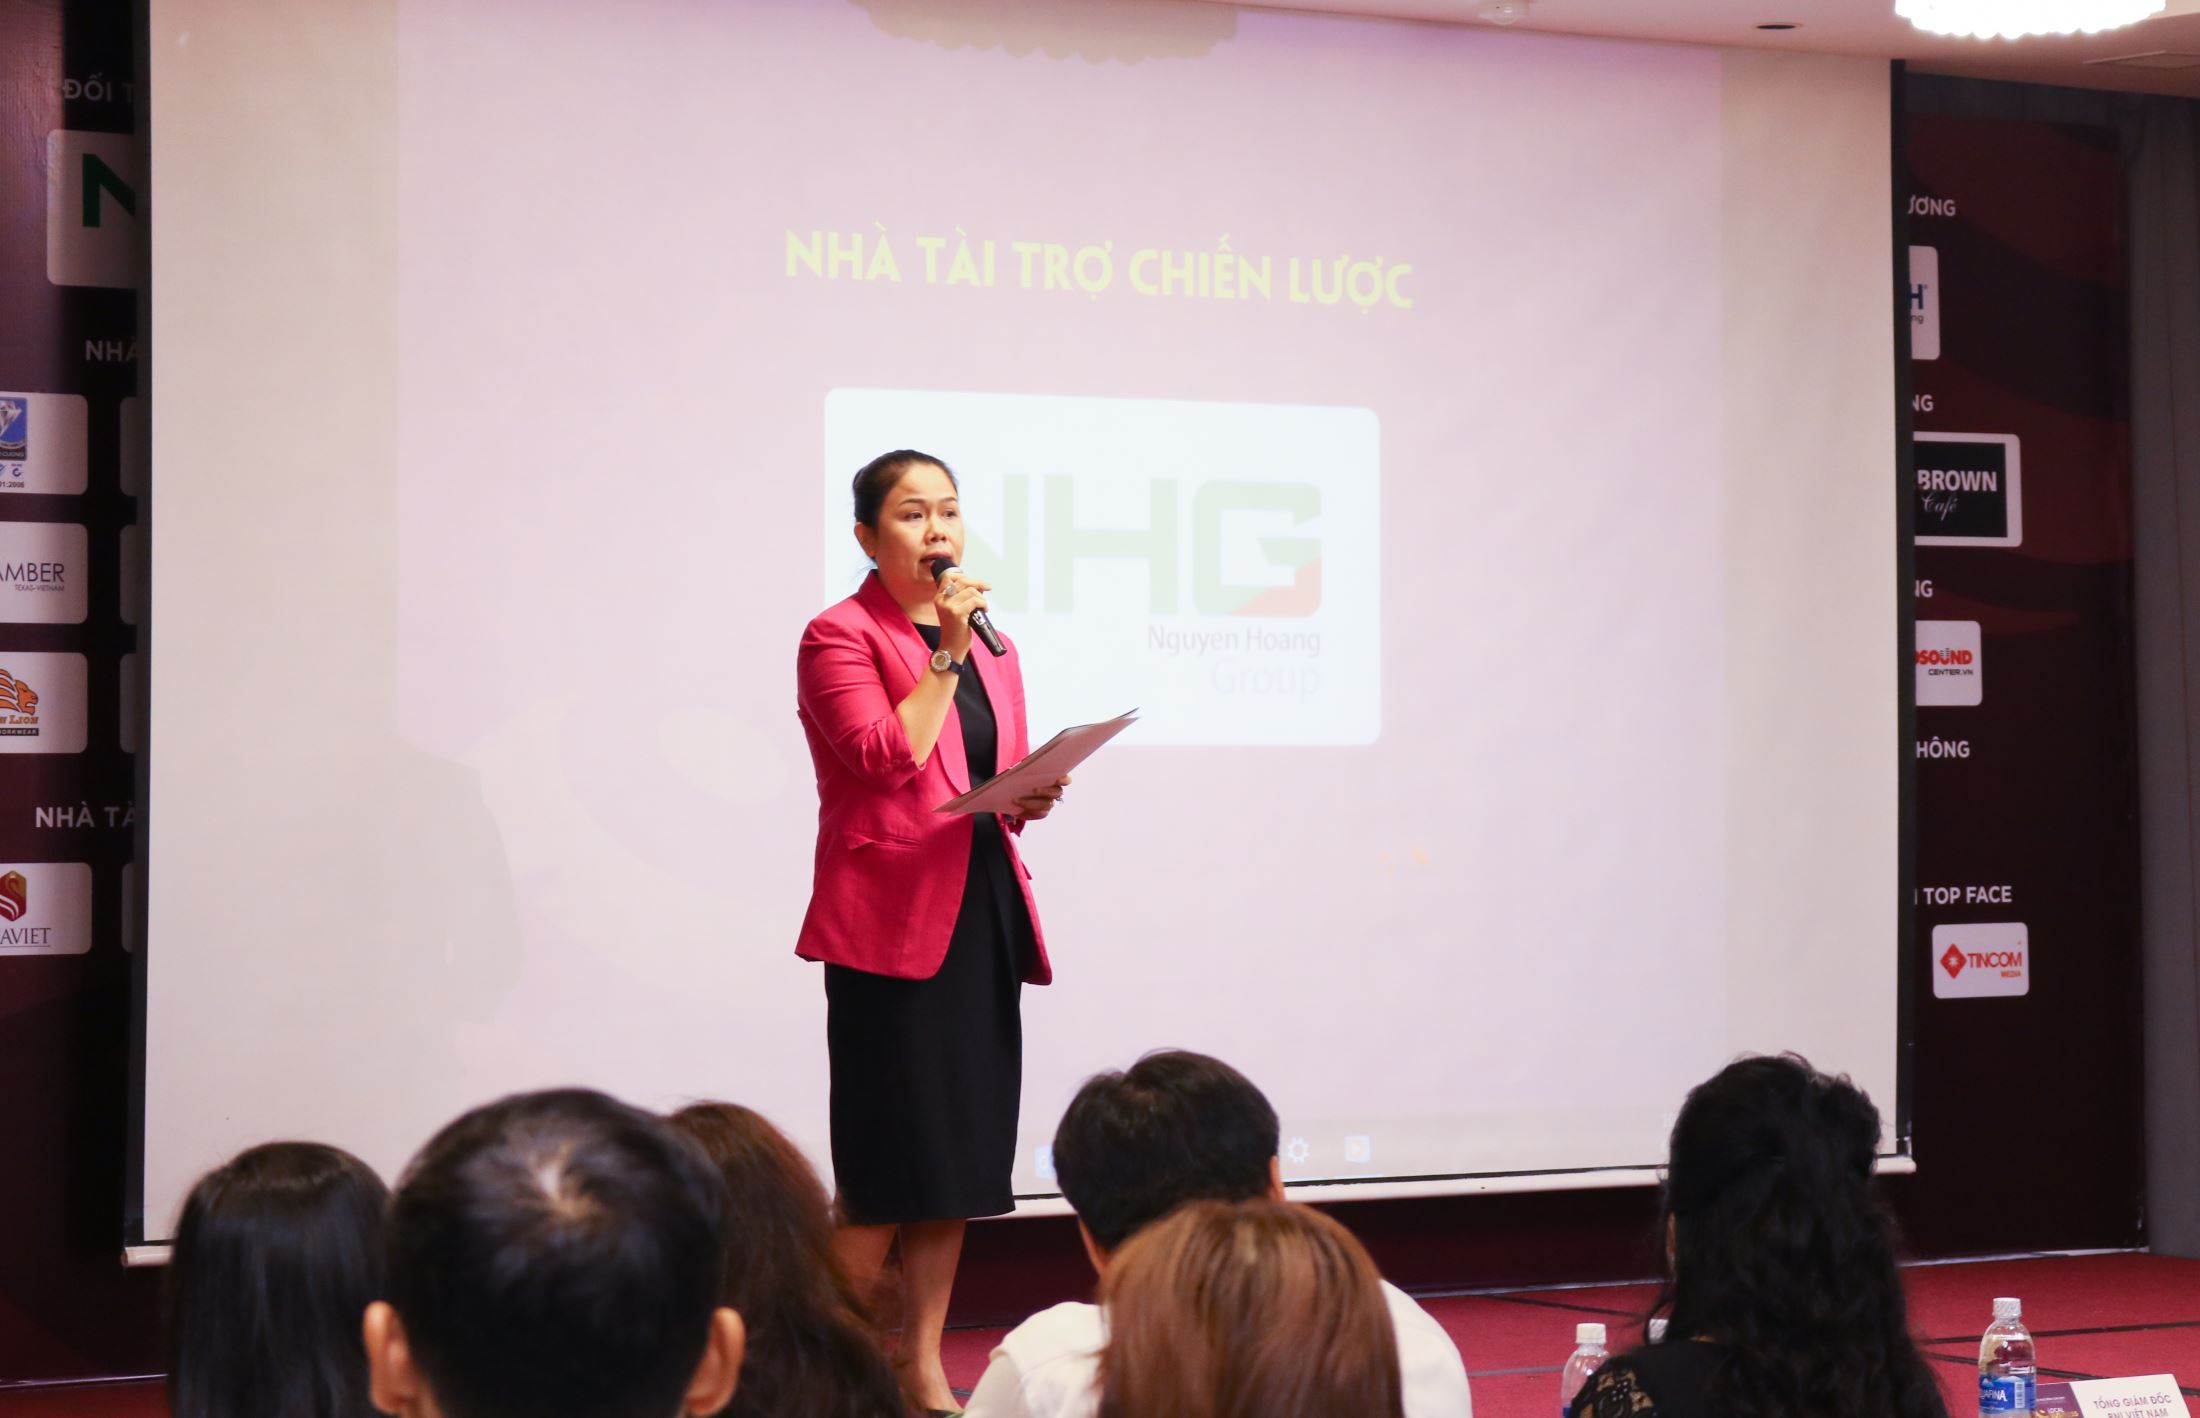 "I strongly believe the cooperation between NHG - BNI will help strengthen the business community, especially youth generations together with Vietnam to step up global integration.", said Ms. Hoang Nguyen Thu Thao, CEO of NHG at the event.